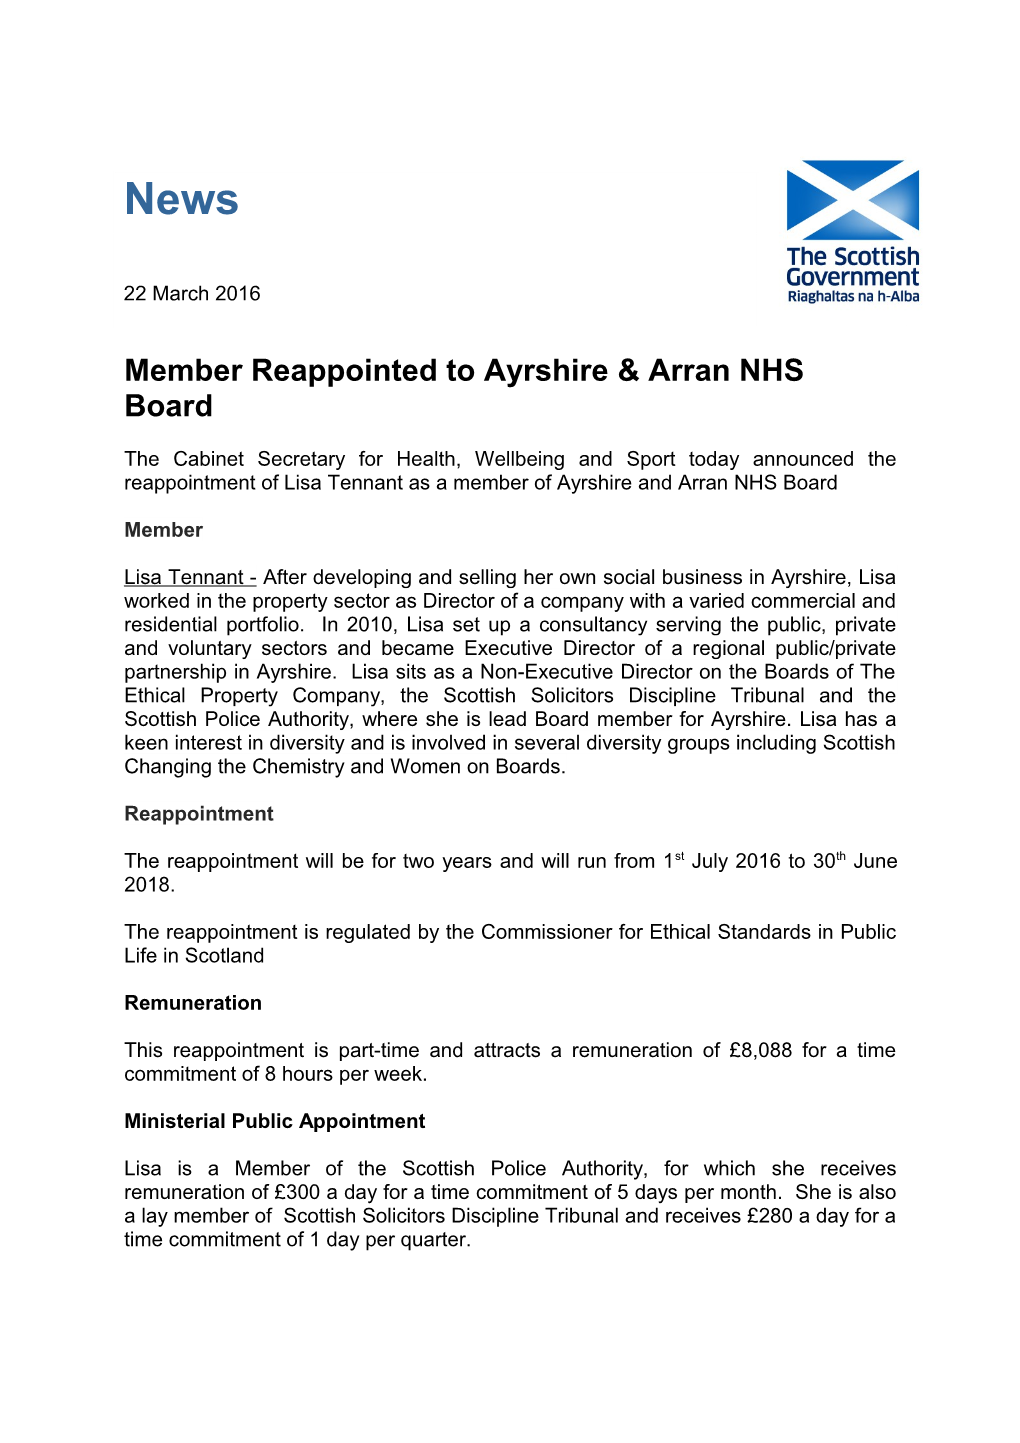 Member Reappointed to Ayrshire & Arran NHS Board